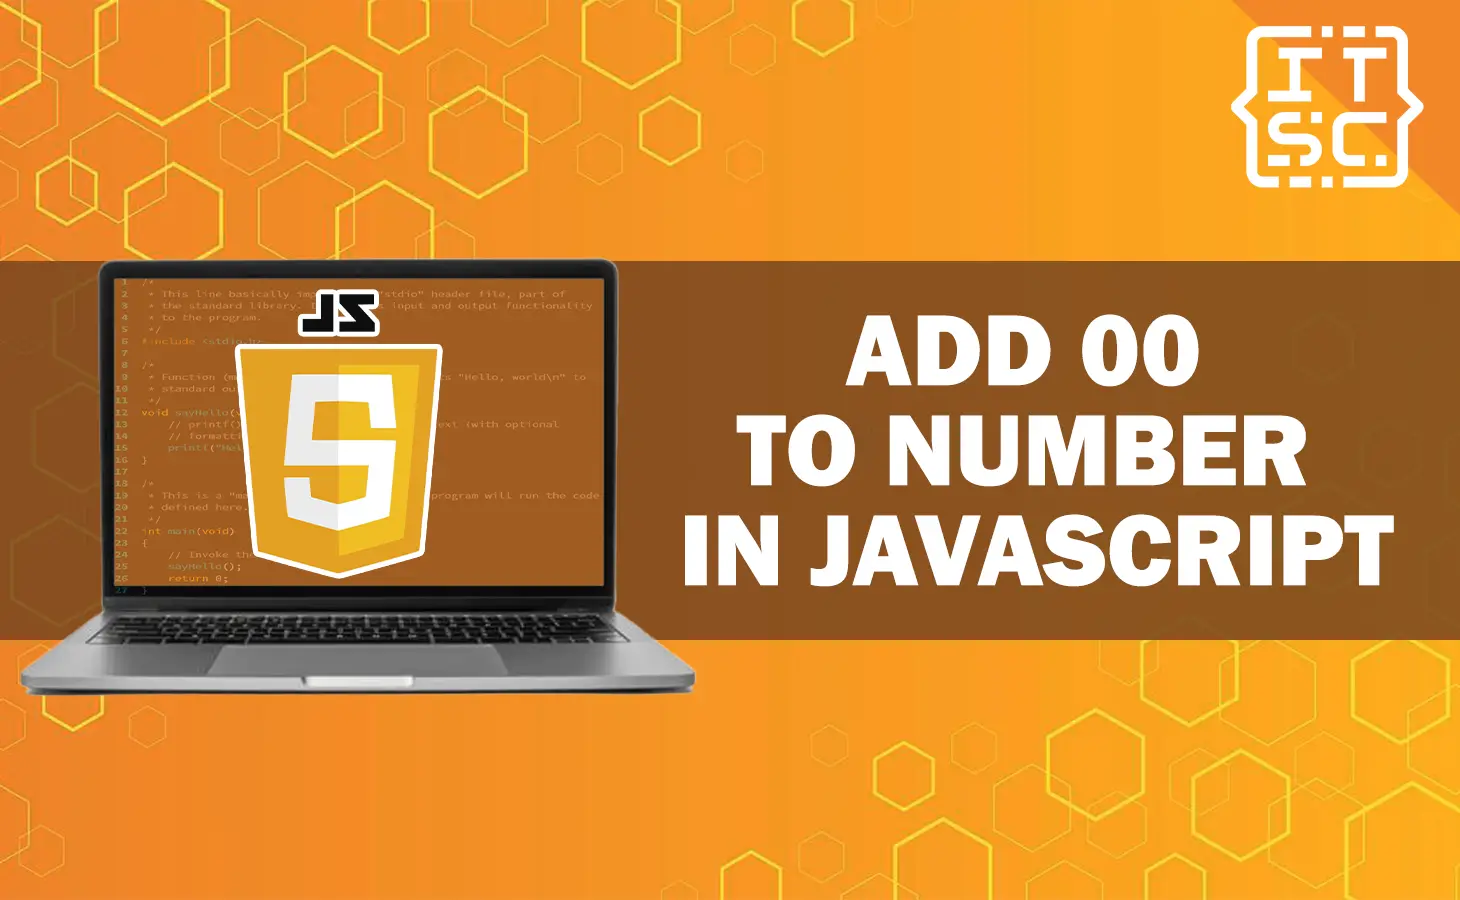 How to add leading and trailing zeros 00 to a number in JavaScript?